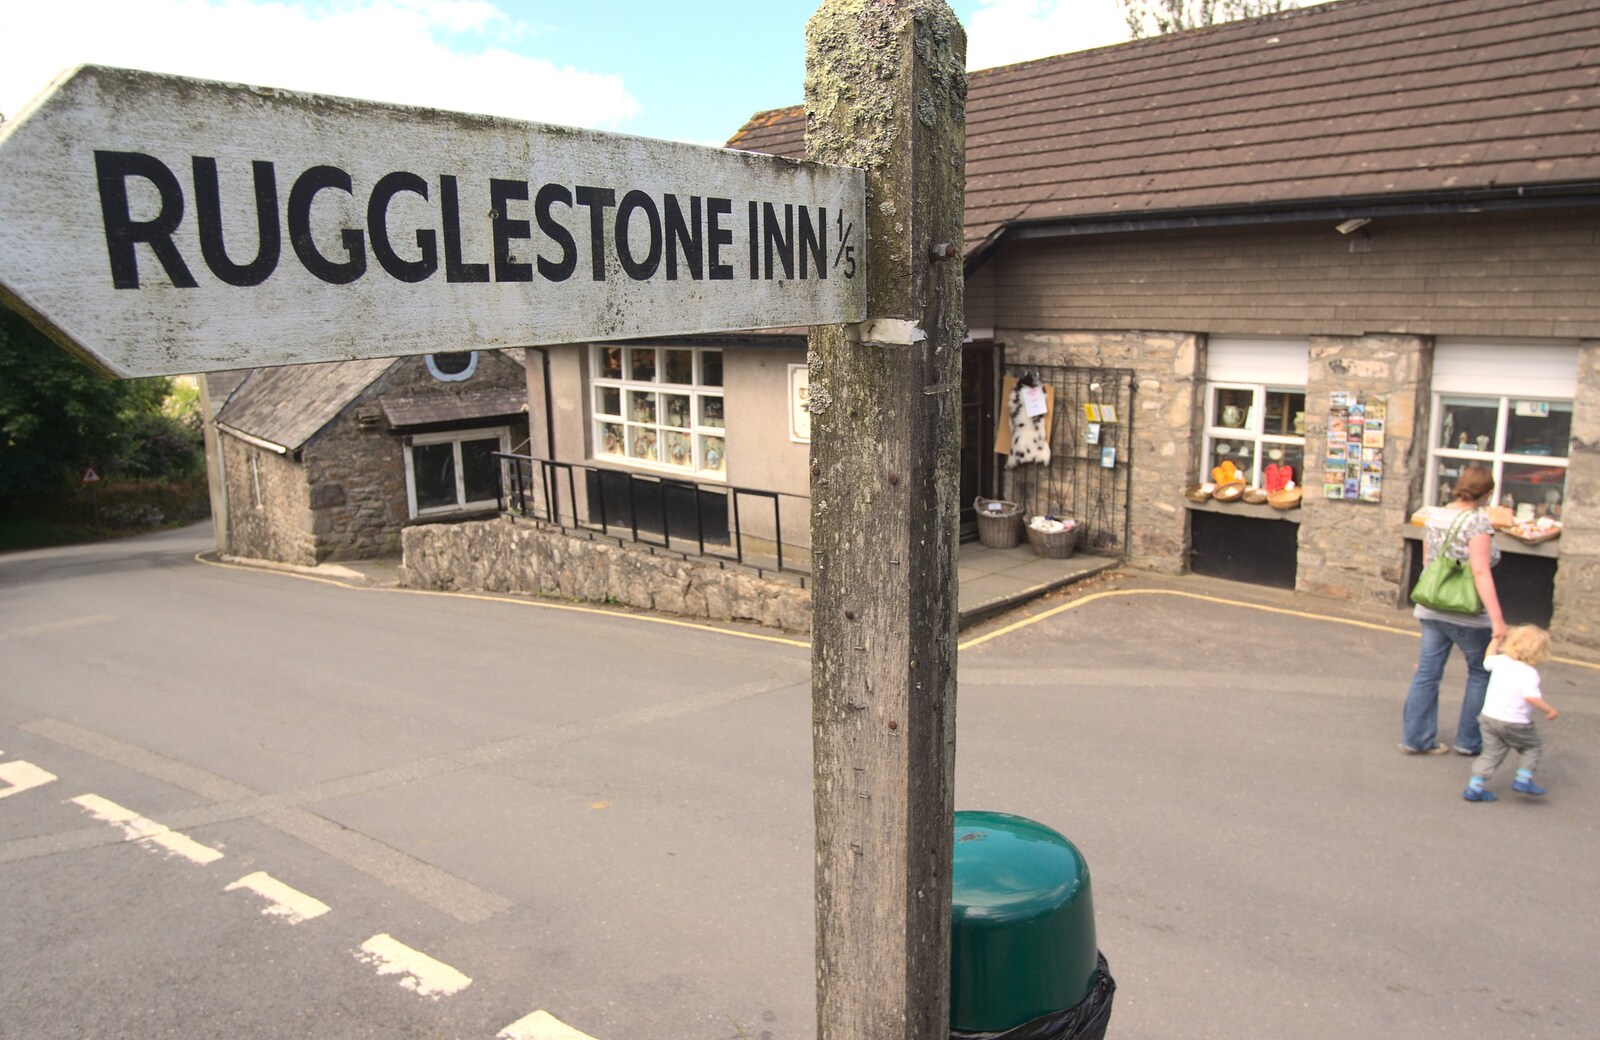 Old-school sign for the Rugglestone Inn from A Camper Van Odyssey: Charmouth, Plymouth, Dartmoor and Bath - 20th June 2011